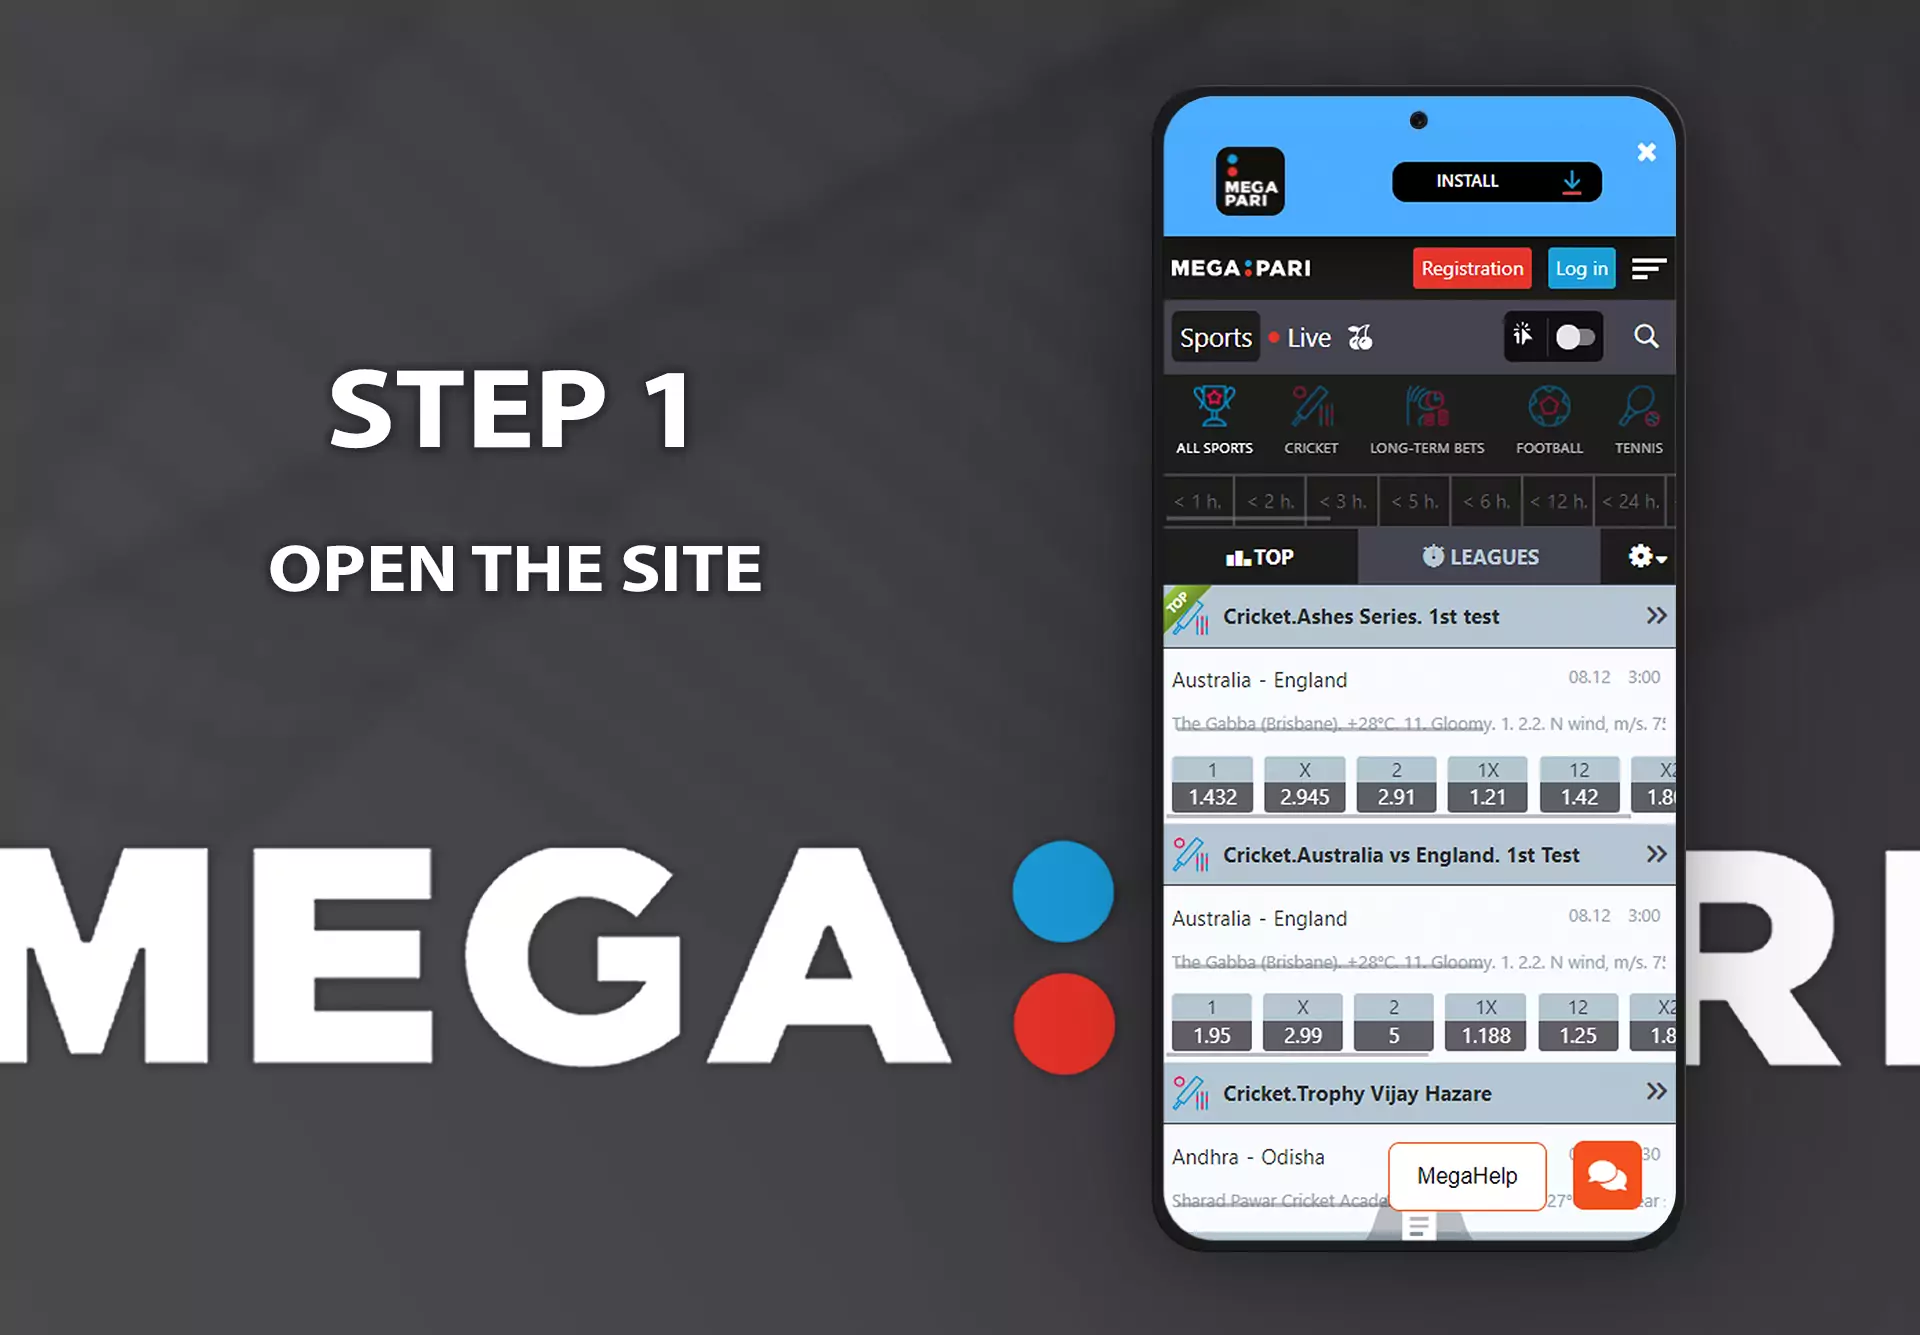 Open the homepage of the MegaPari site in a browser on your device.